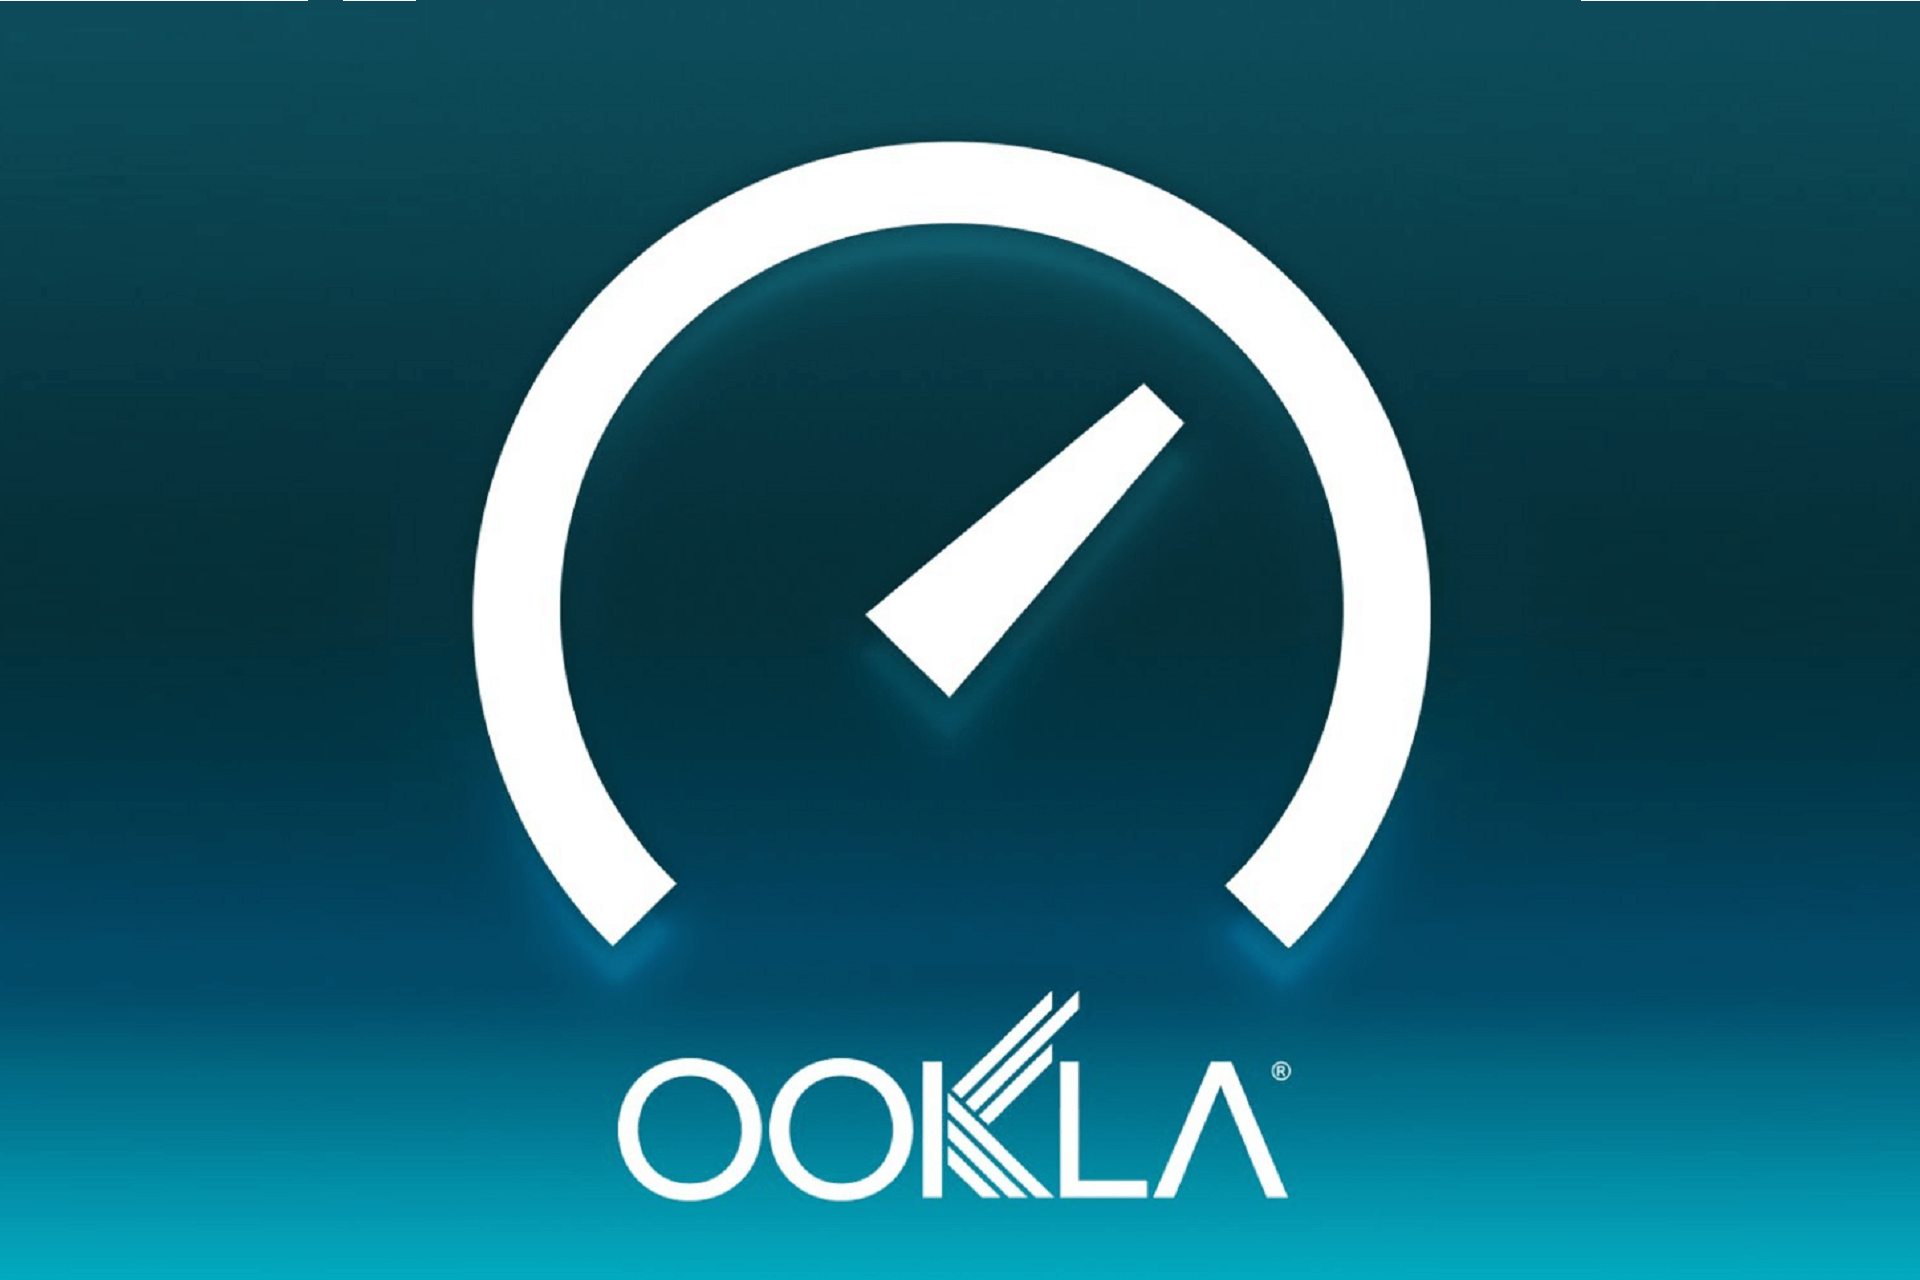 Packet loss test Speedtest by Ookla